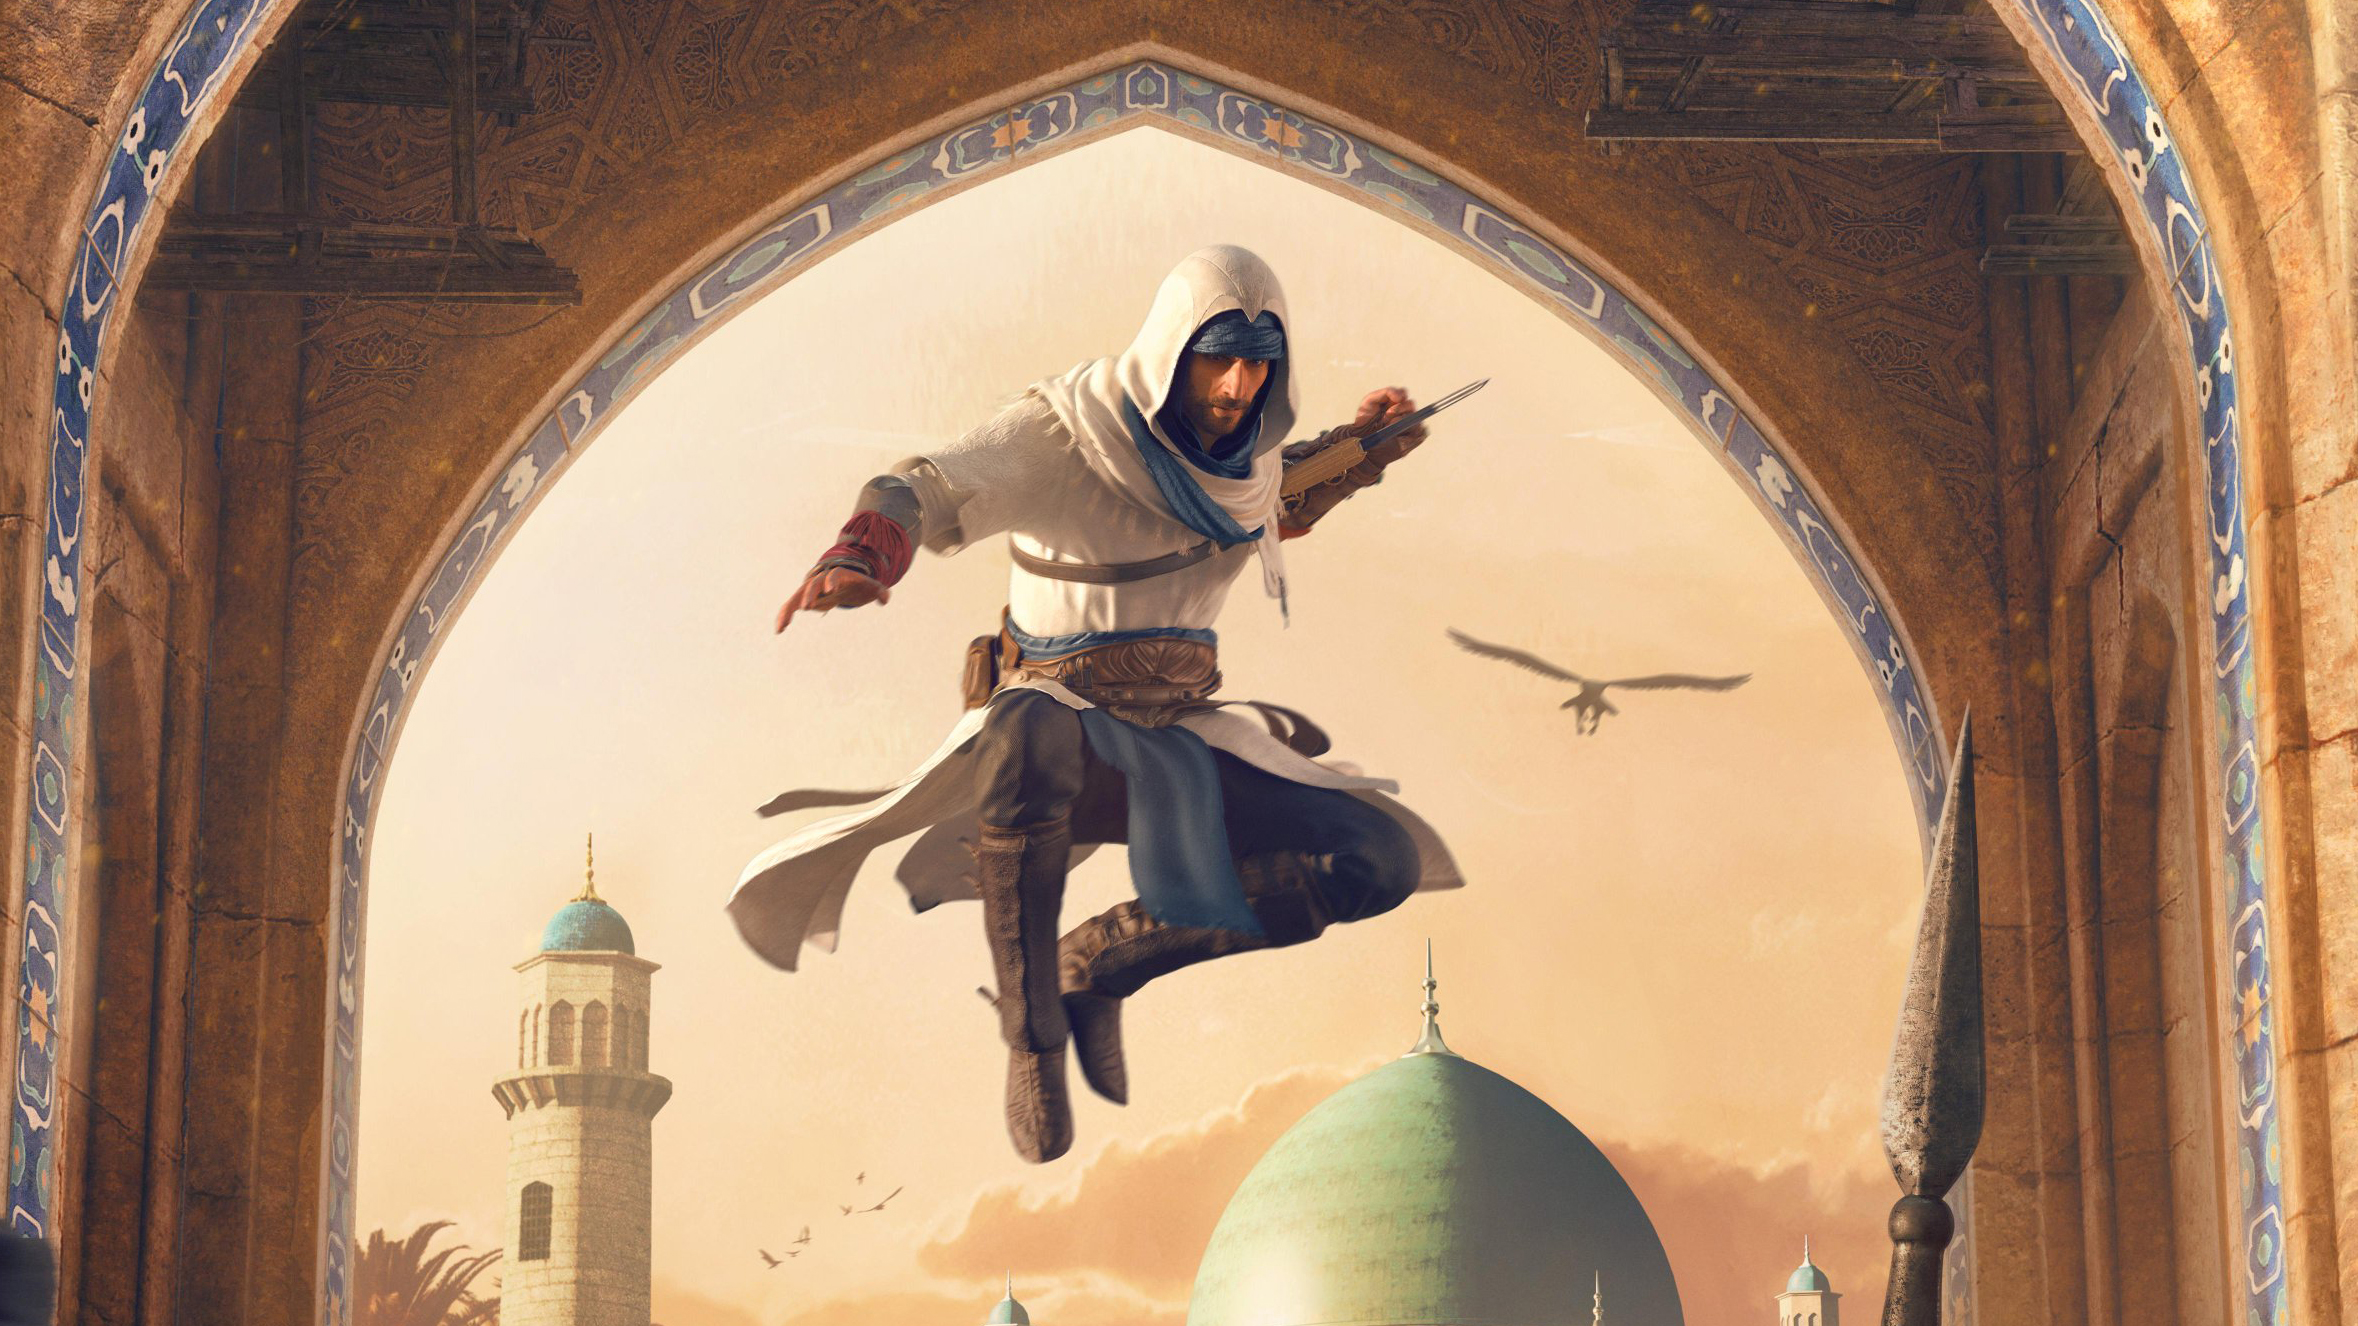 Assassin's Creed Mirage feels like a throwback (and digression) to